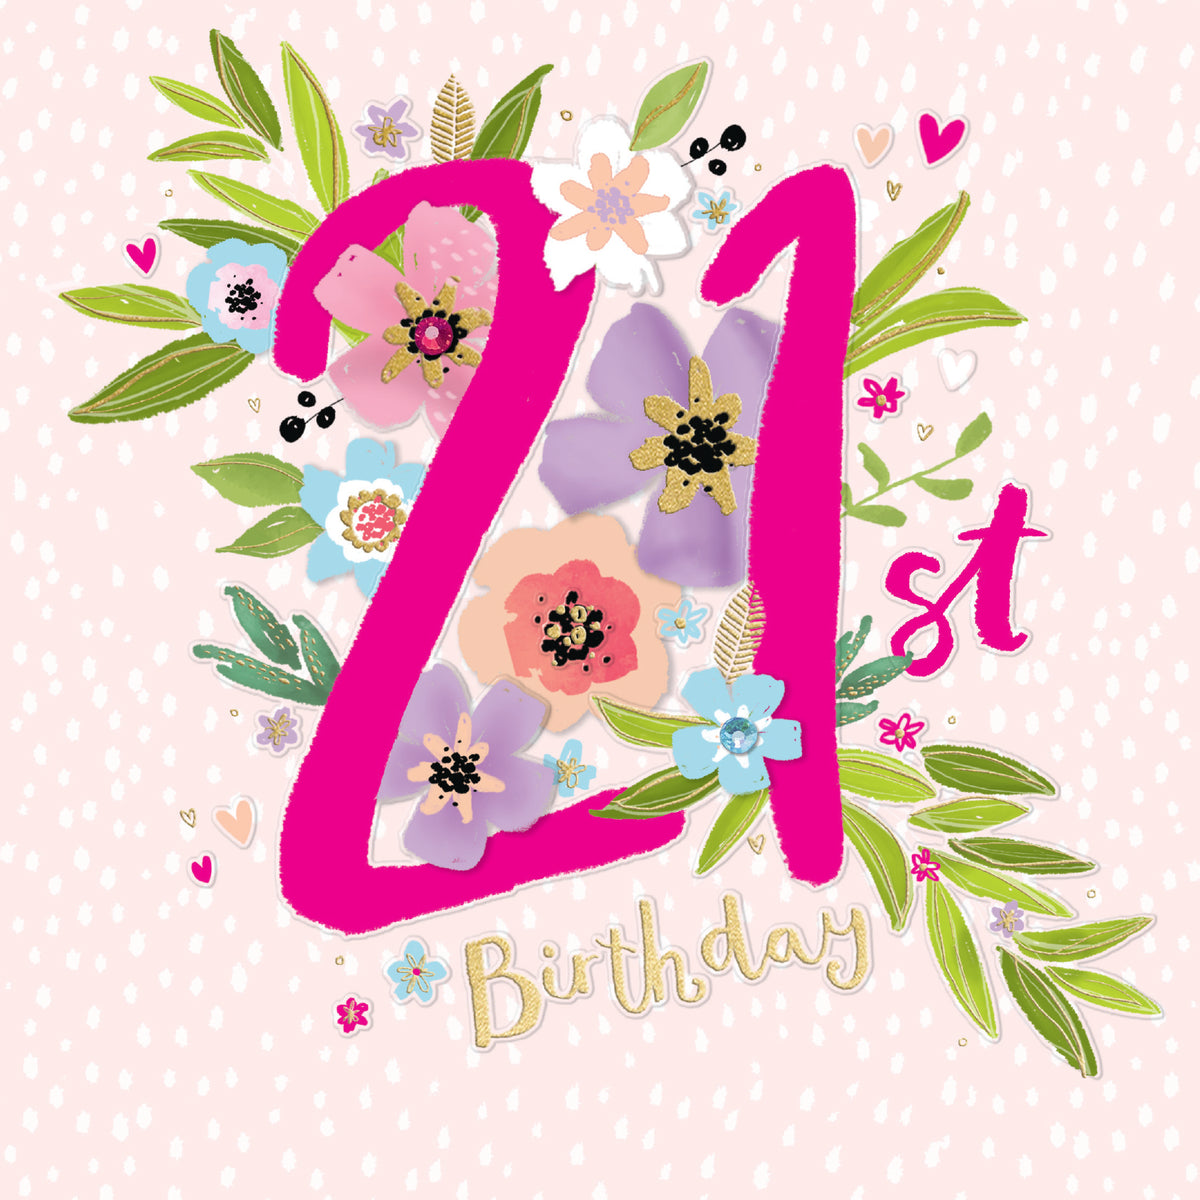 Big Pastel Flowers 21st Birthday Card from Penny Black